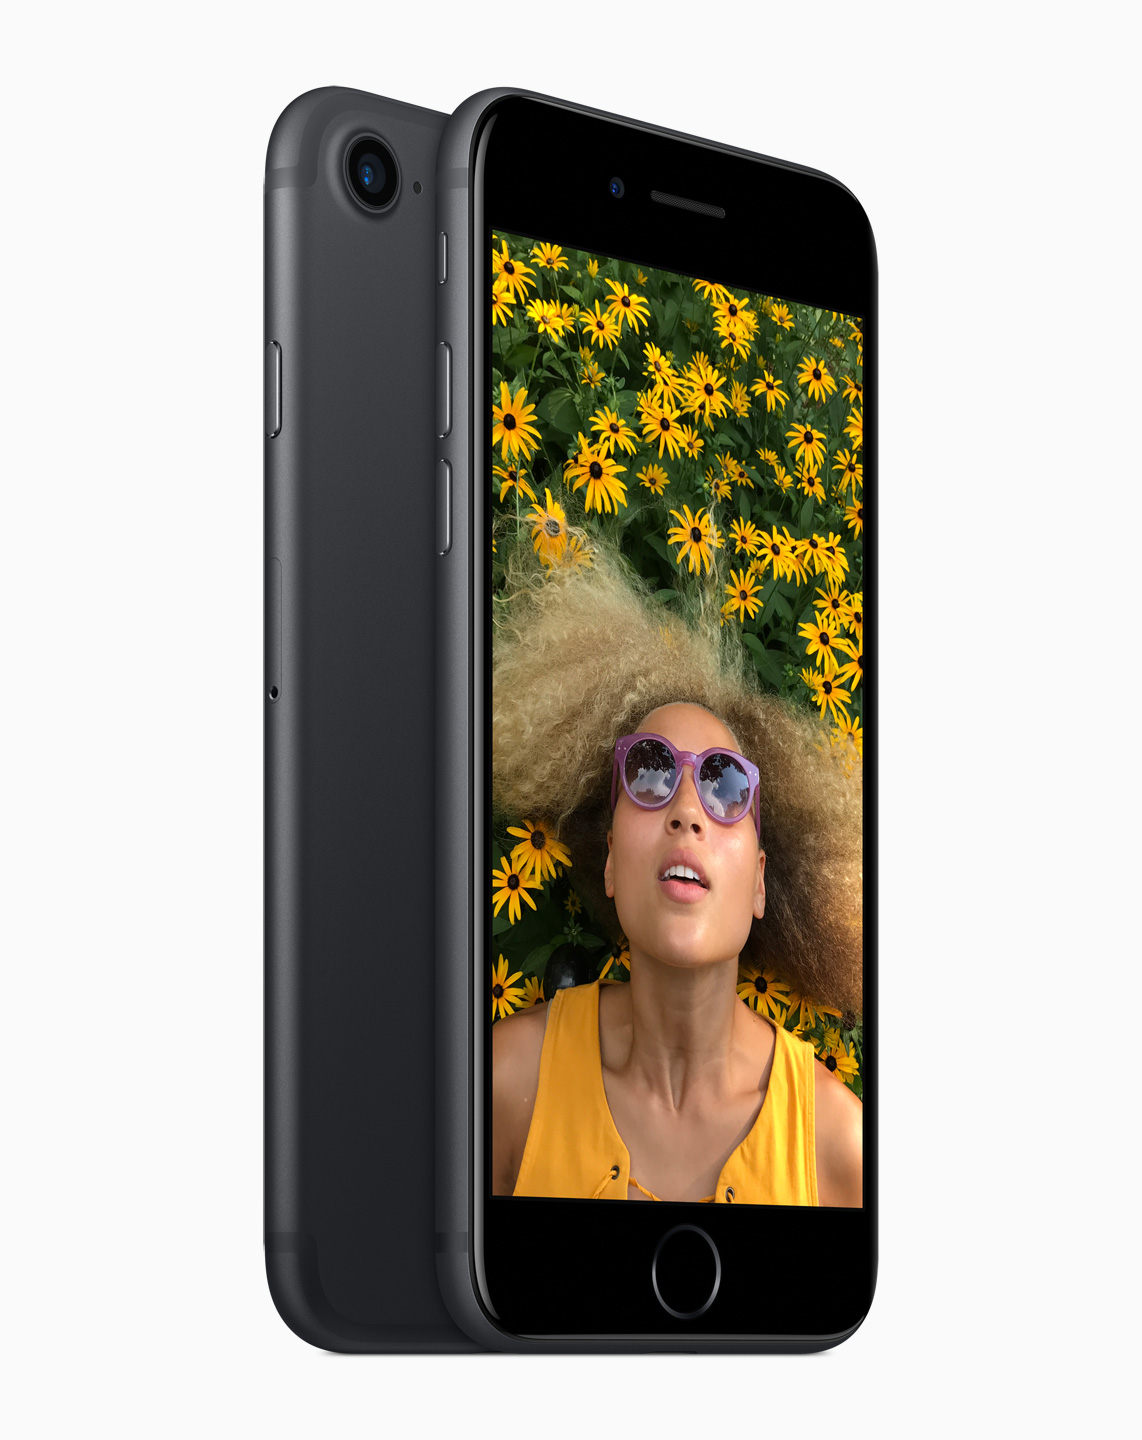 Apple Officially Unveils Water Resistant iPhone 7 With Better Camera, Stereo Speakers, Longer Battery